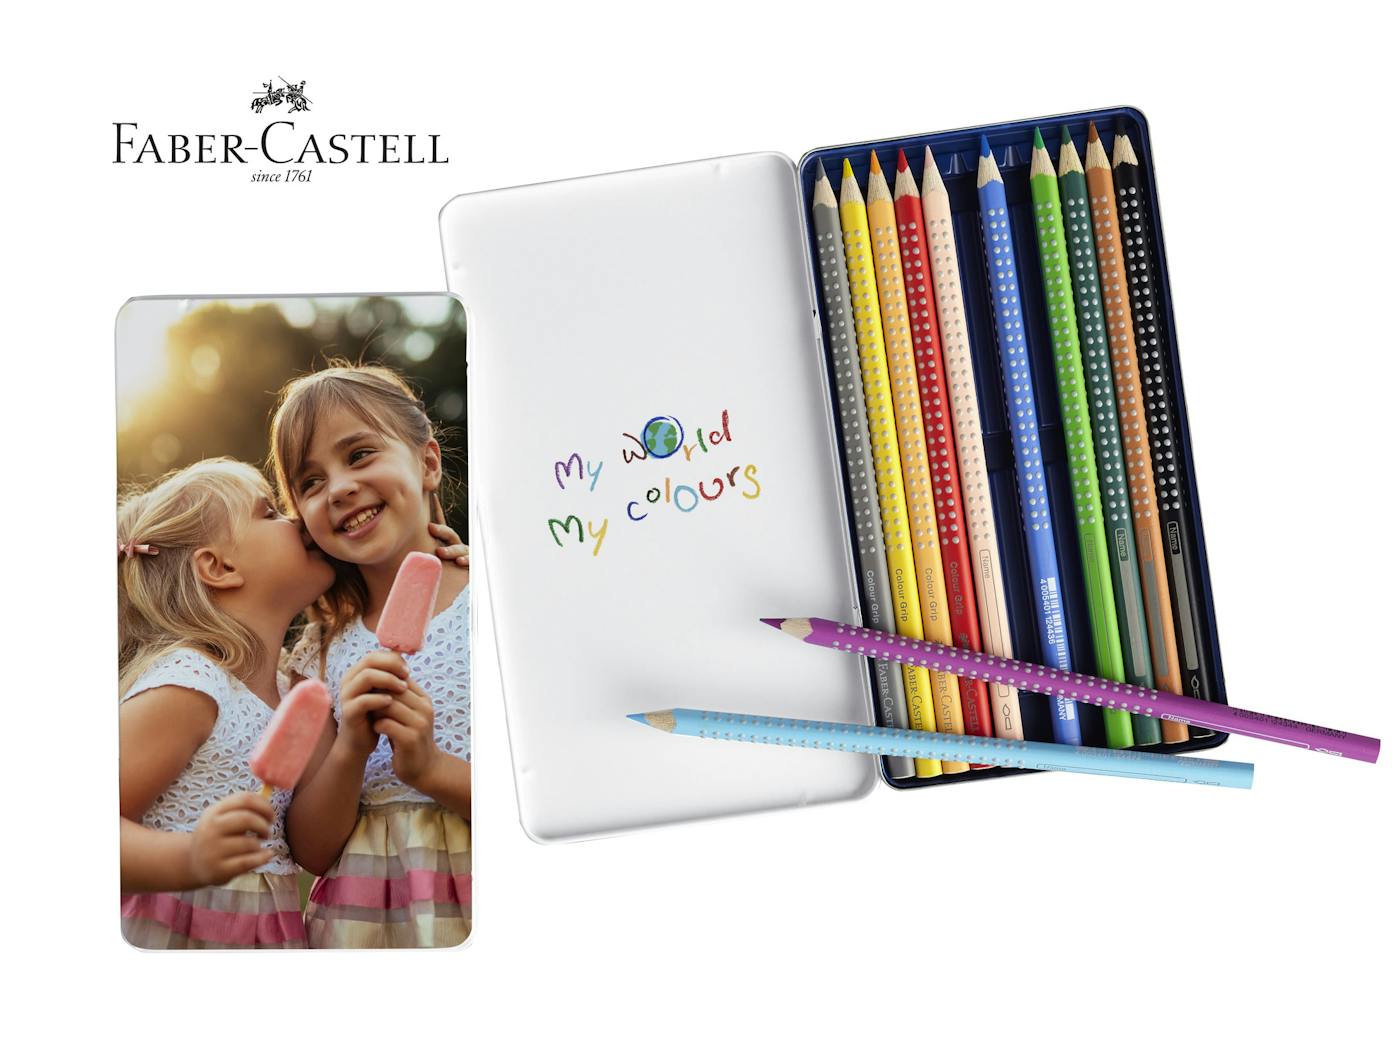 Faber-Castell f�rgpennor